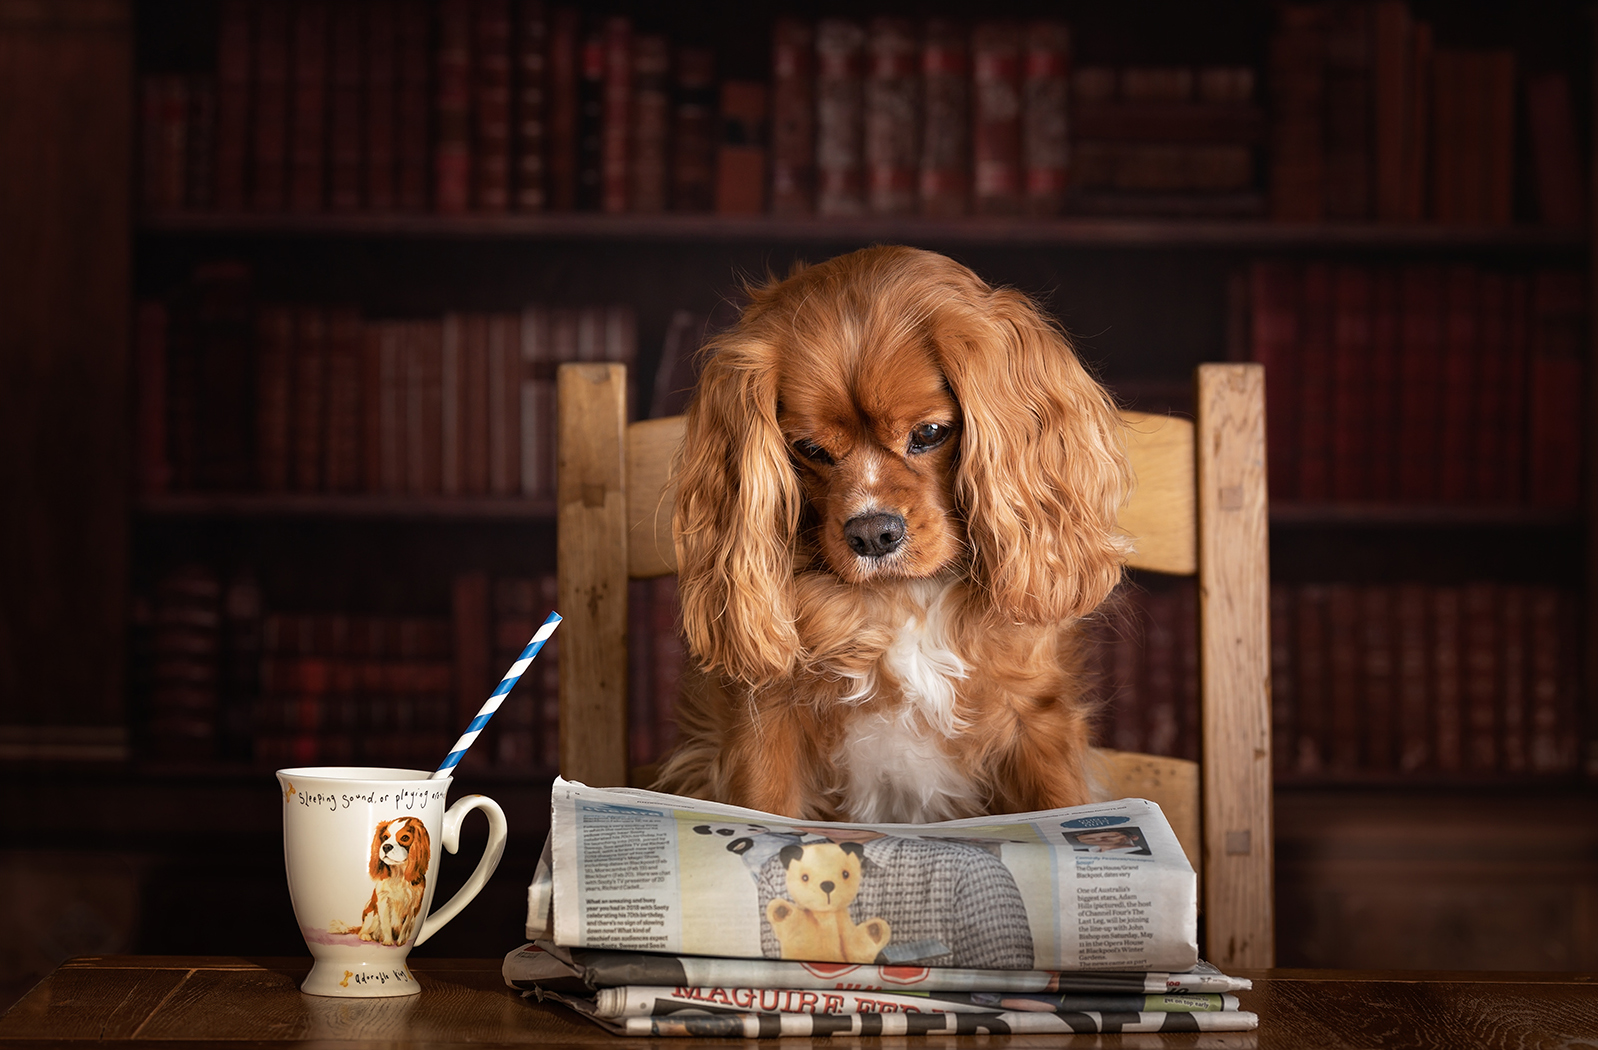 A Dog reading the newspaper